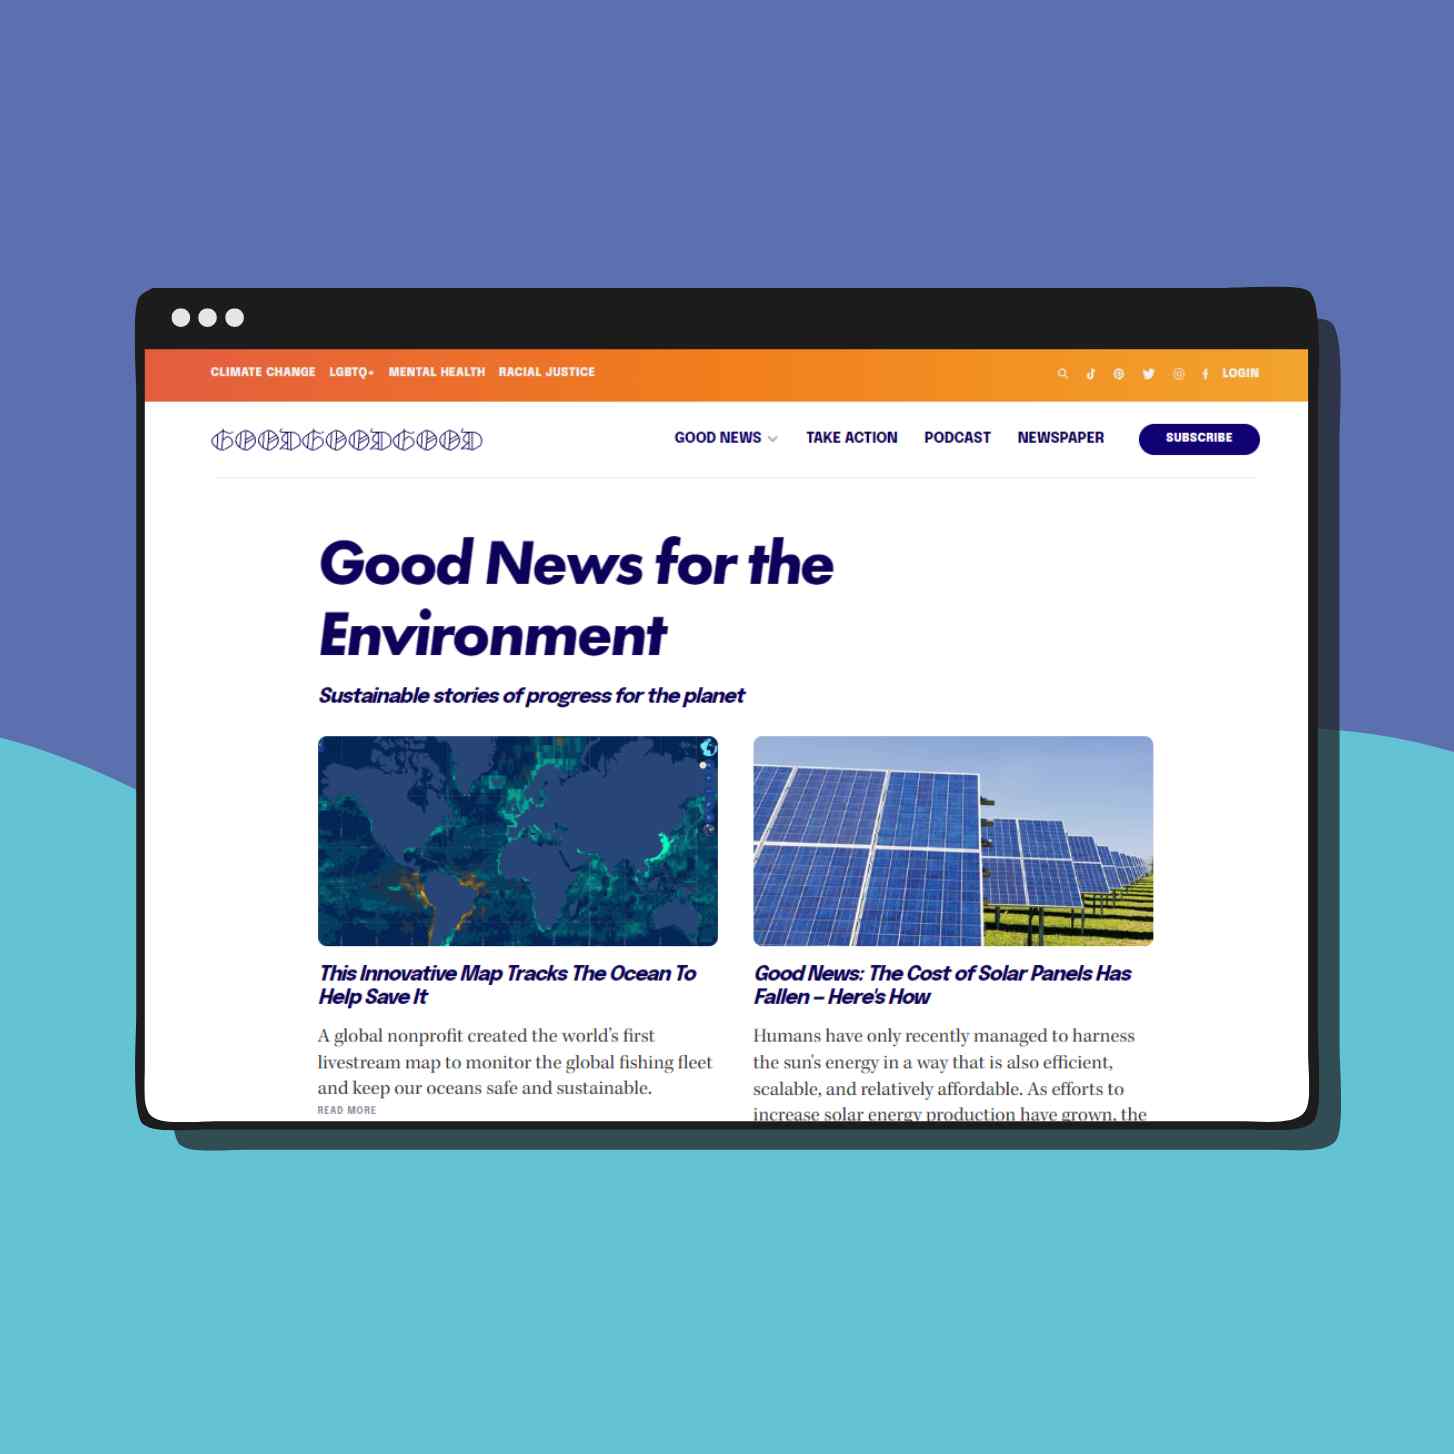 Webpage of GoodGoodGood Website Showing Their Latest Articles About Good News For The Environment